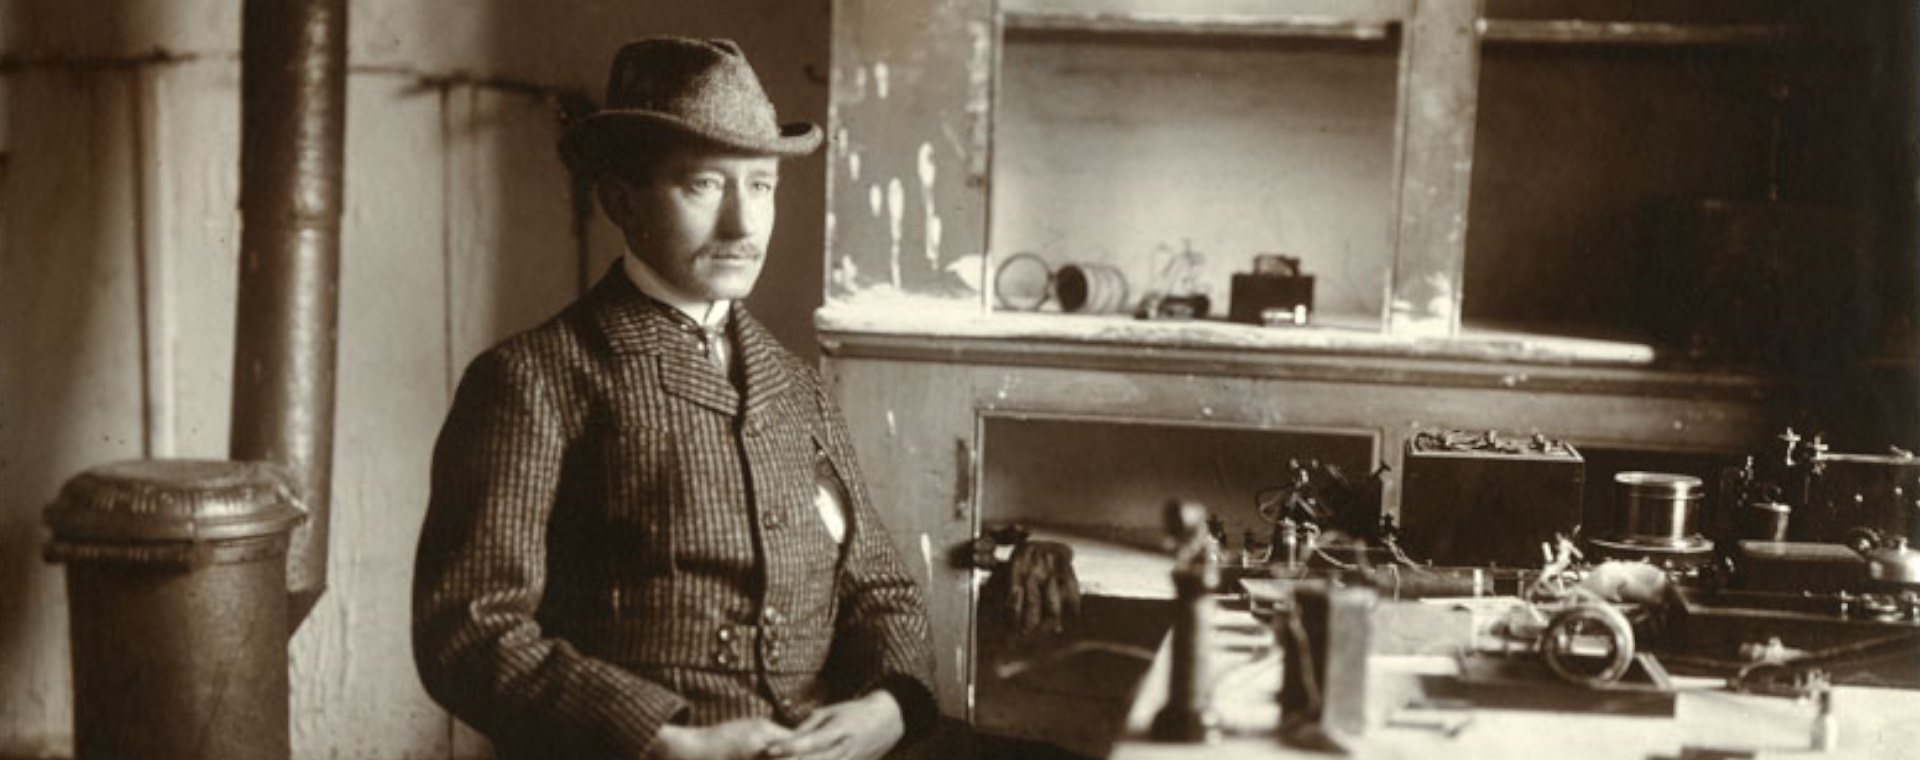 A man in a checked jacket and hat sits at a table topped by wireless equipment. Behind him are bare cupboards with no doors, and a metal stove and stovepipe.